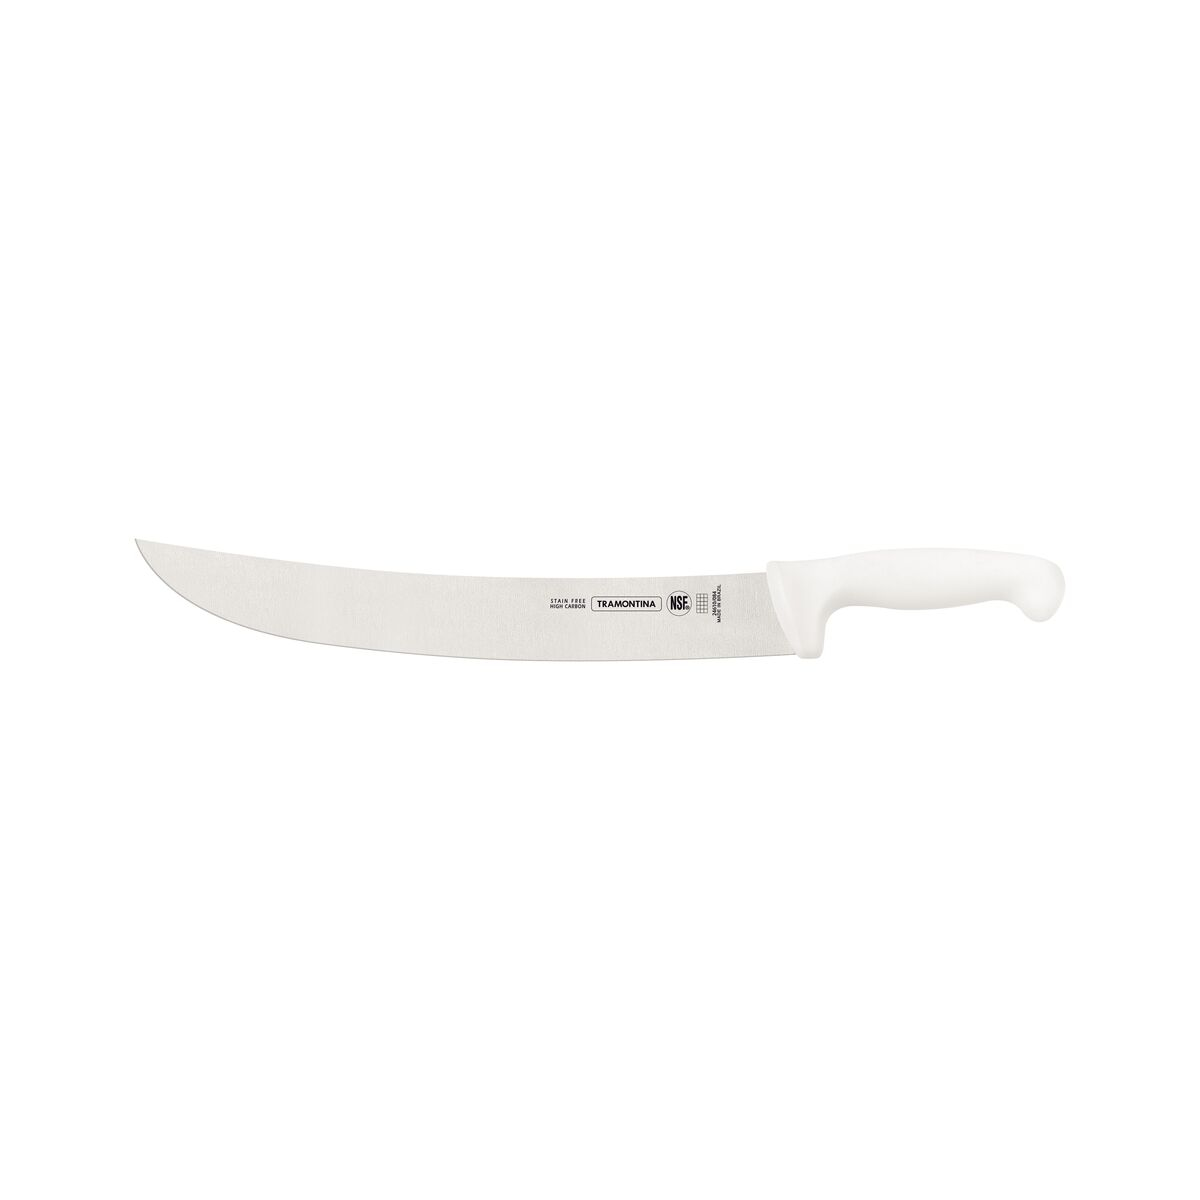 Tramontina Professional 14" Meat Knife with Stainless-Steel Blade and White Polypropylene Handle